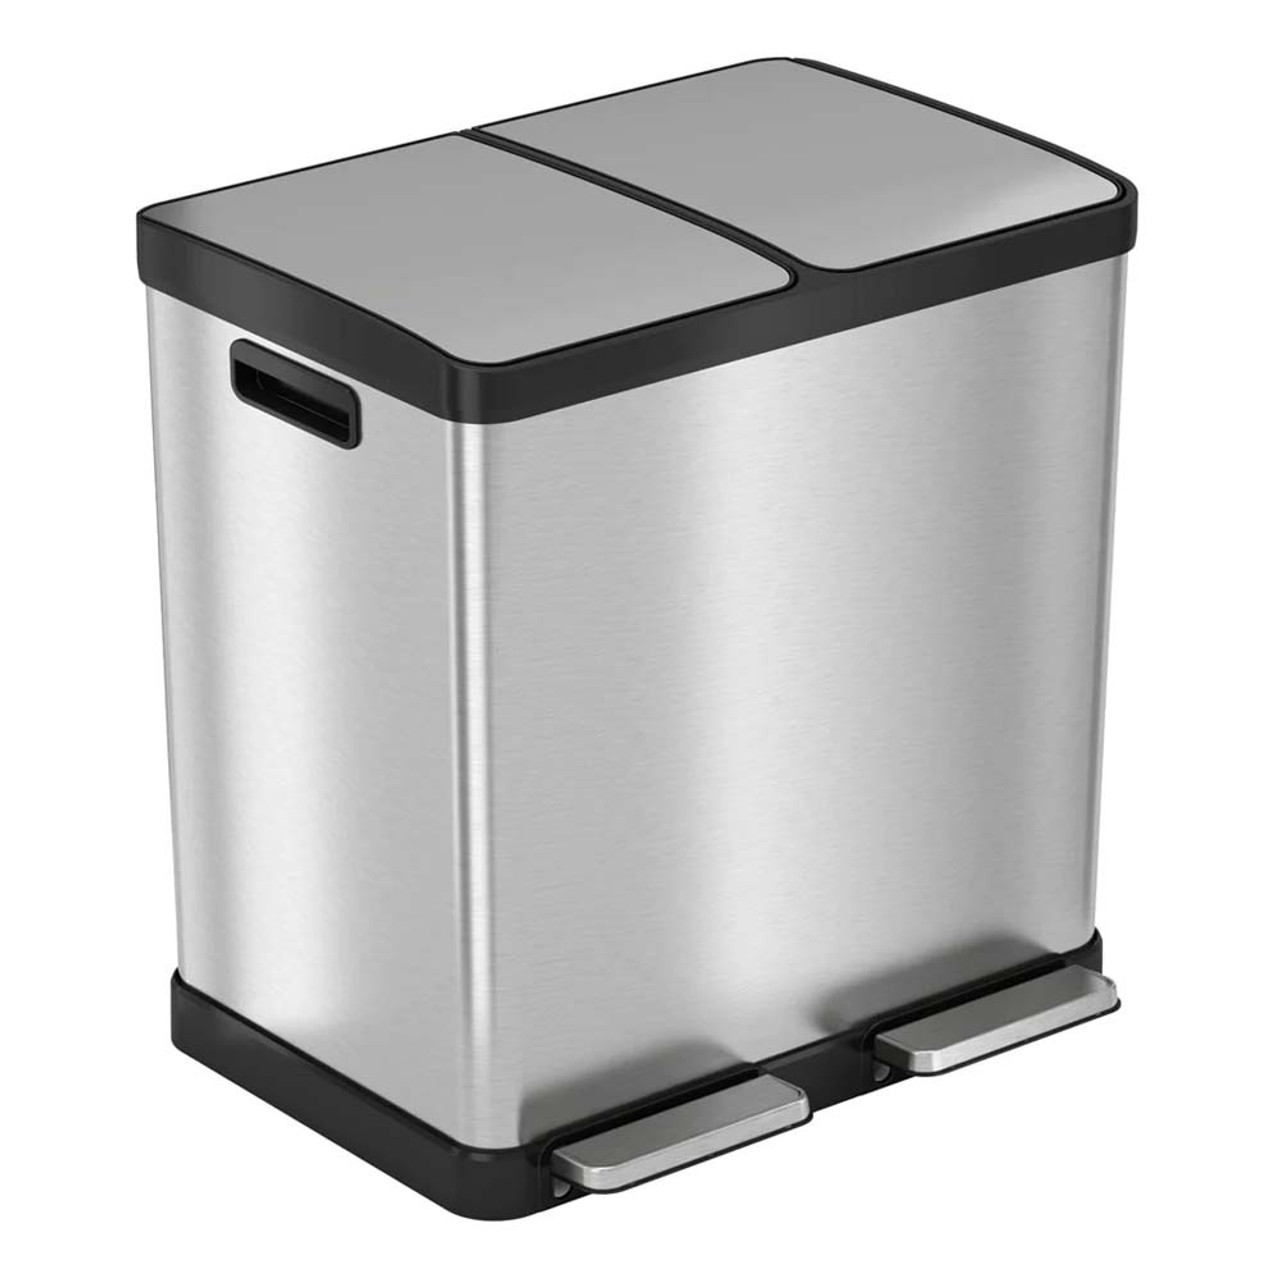 16 Gal. Skinny Plastic Home & Office Trash Can or Recycling Bin